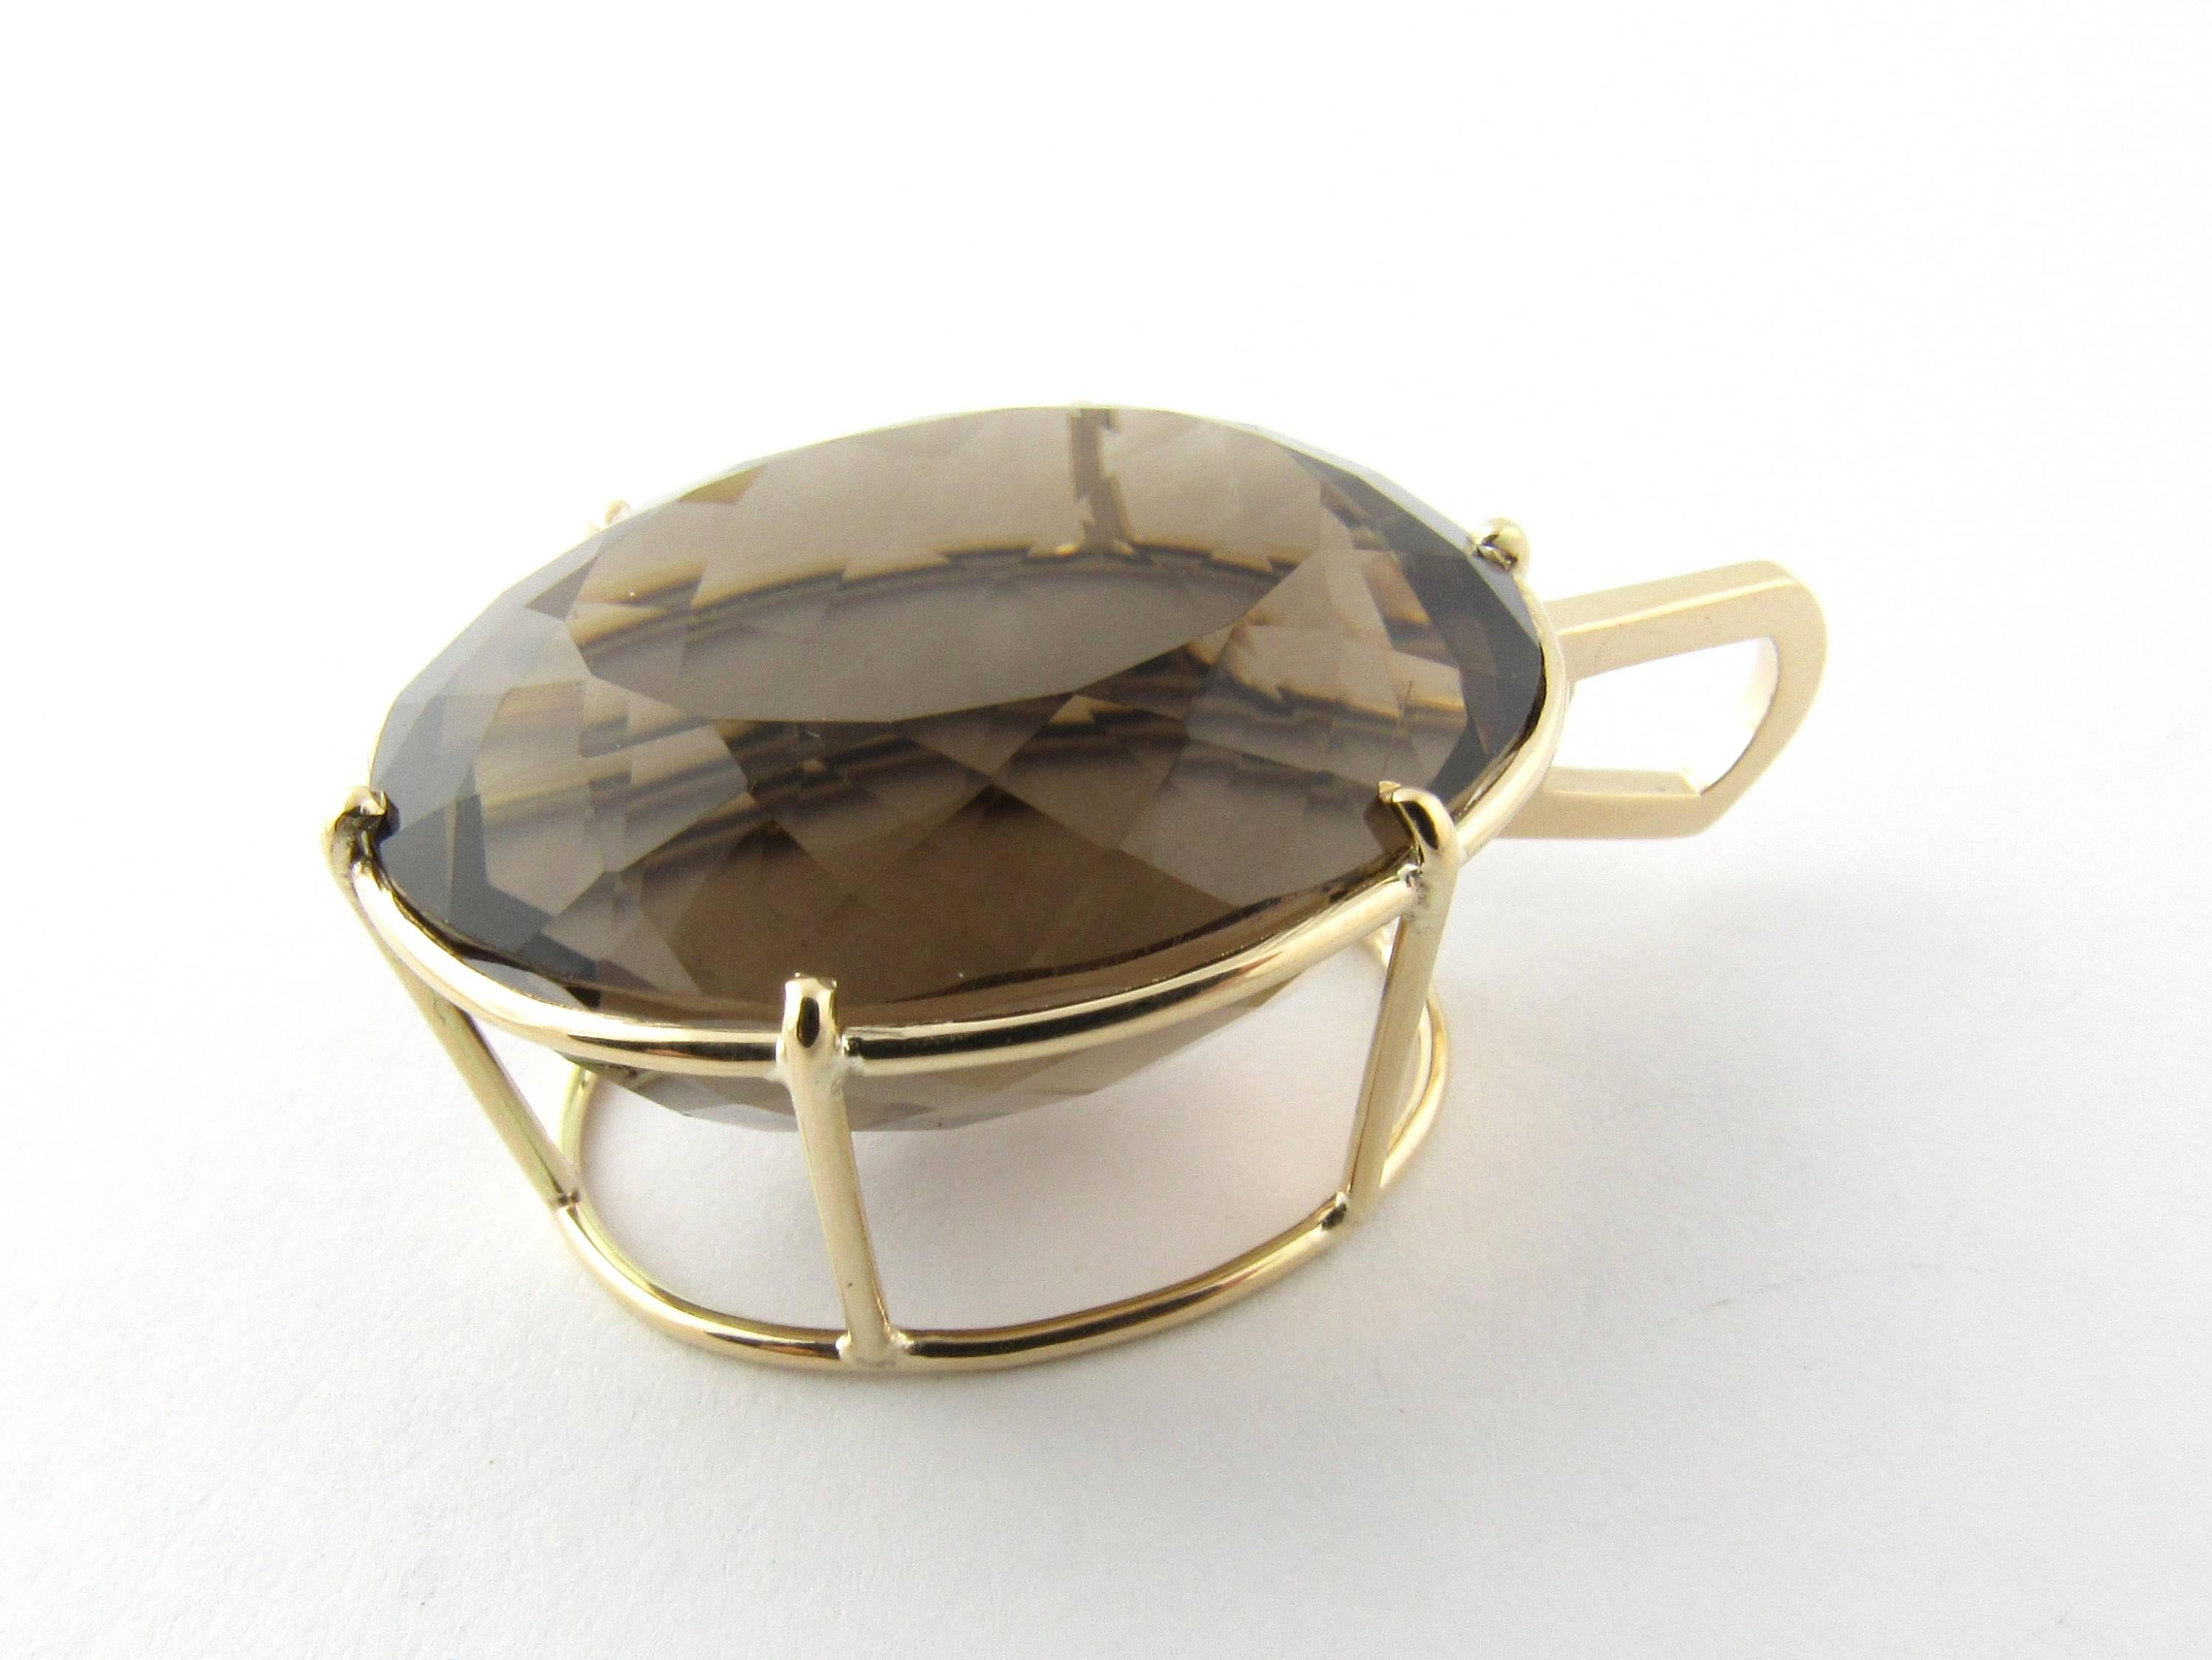 Vintage 14 Karat Yellow Gold Smoky Quartz Pendant
This fabulous pendant features a stunning oval smoky quartz 49.62 cts ( 25.4 x 21.8 x 15.9 mm ) set in beautifully detailed 14K yellow gold. Height: 16.5 mm. 
Smoky quartz is medium moderately strong